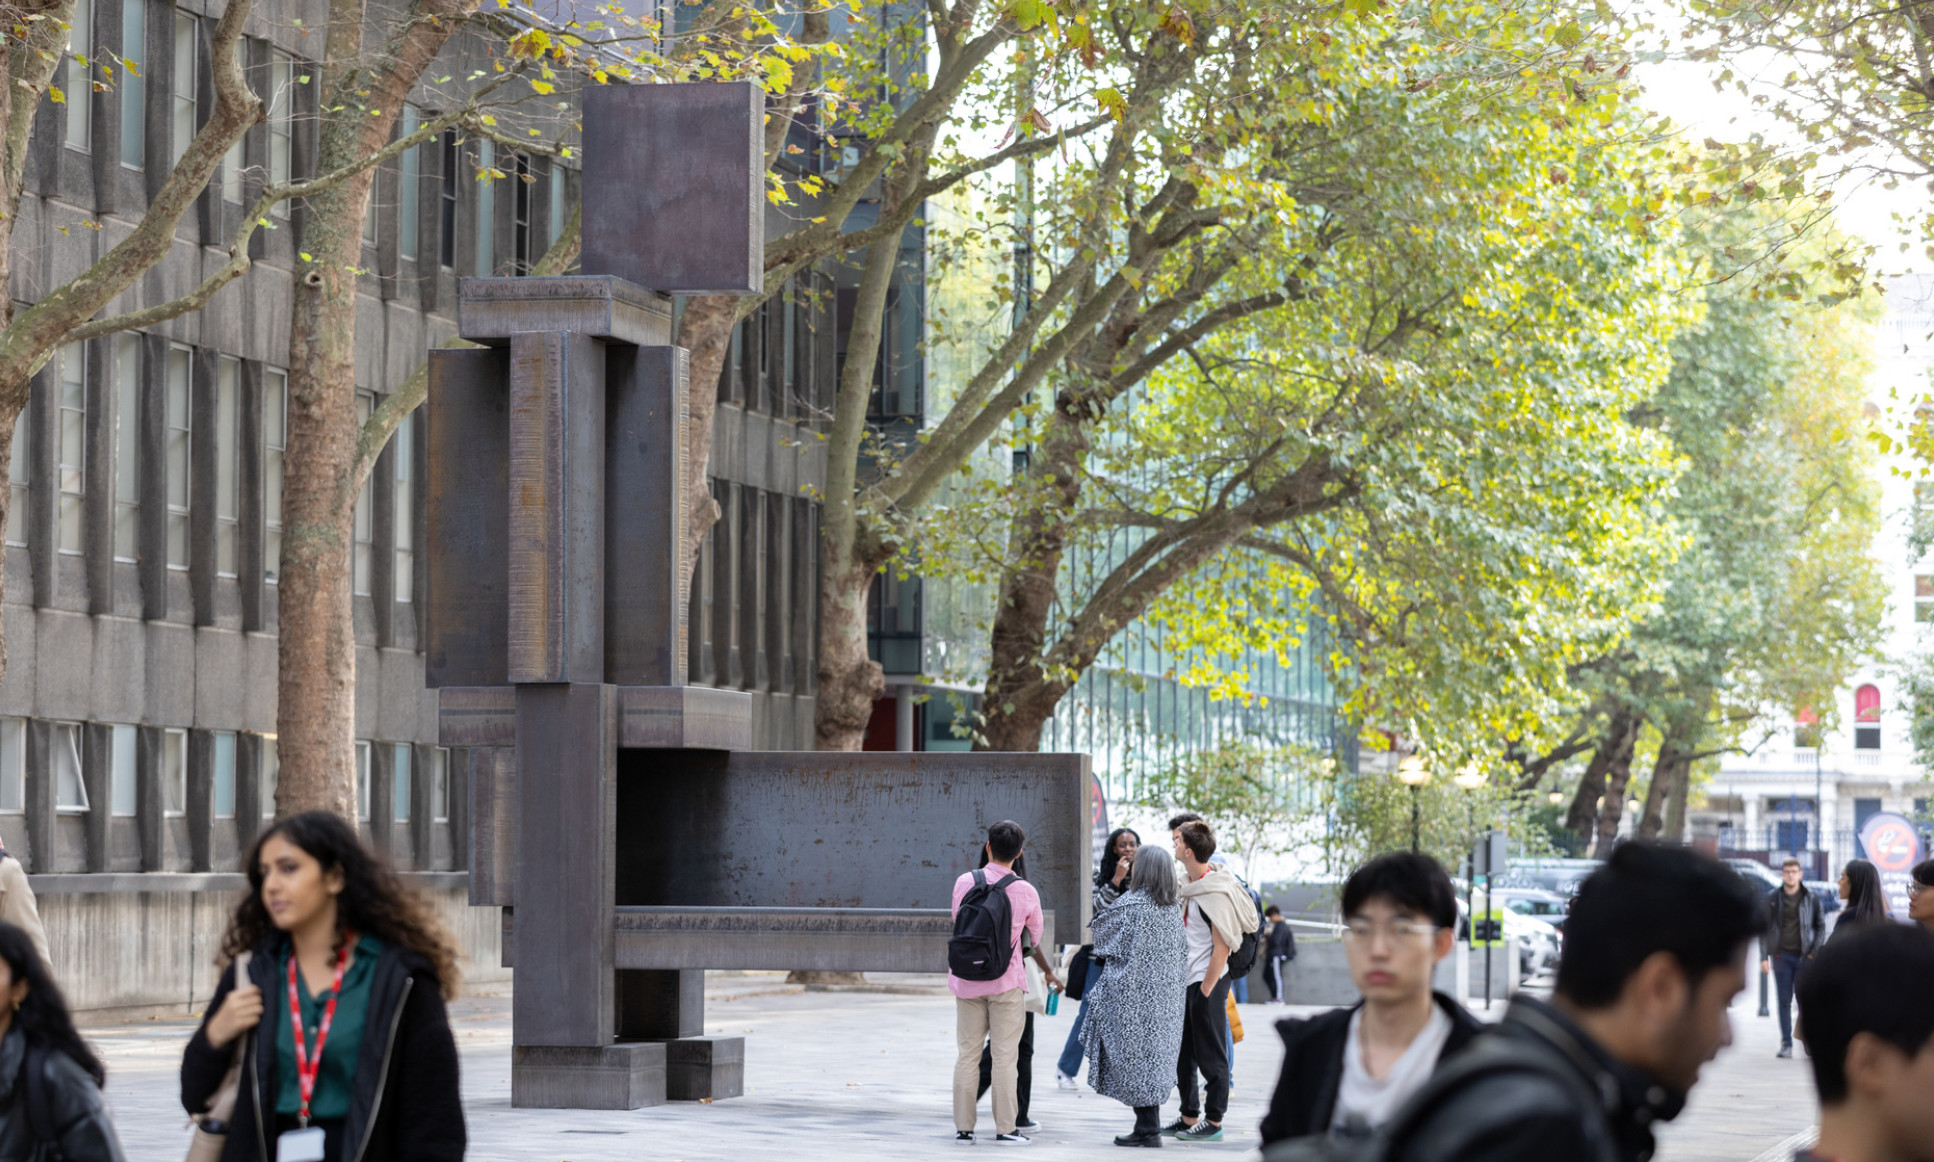 A side view of Antony Gormley's ALERT on Imperial's South Kensington Campus.